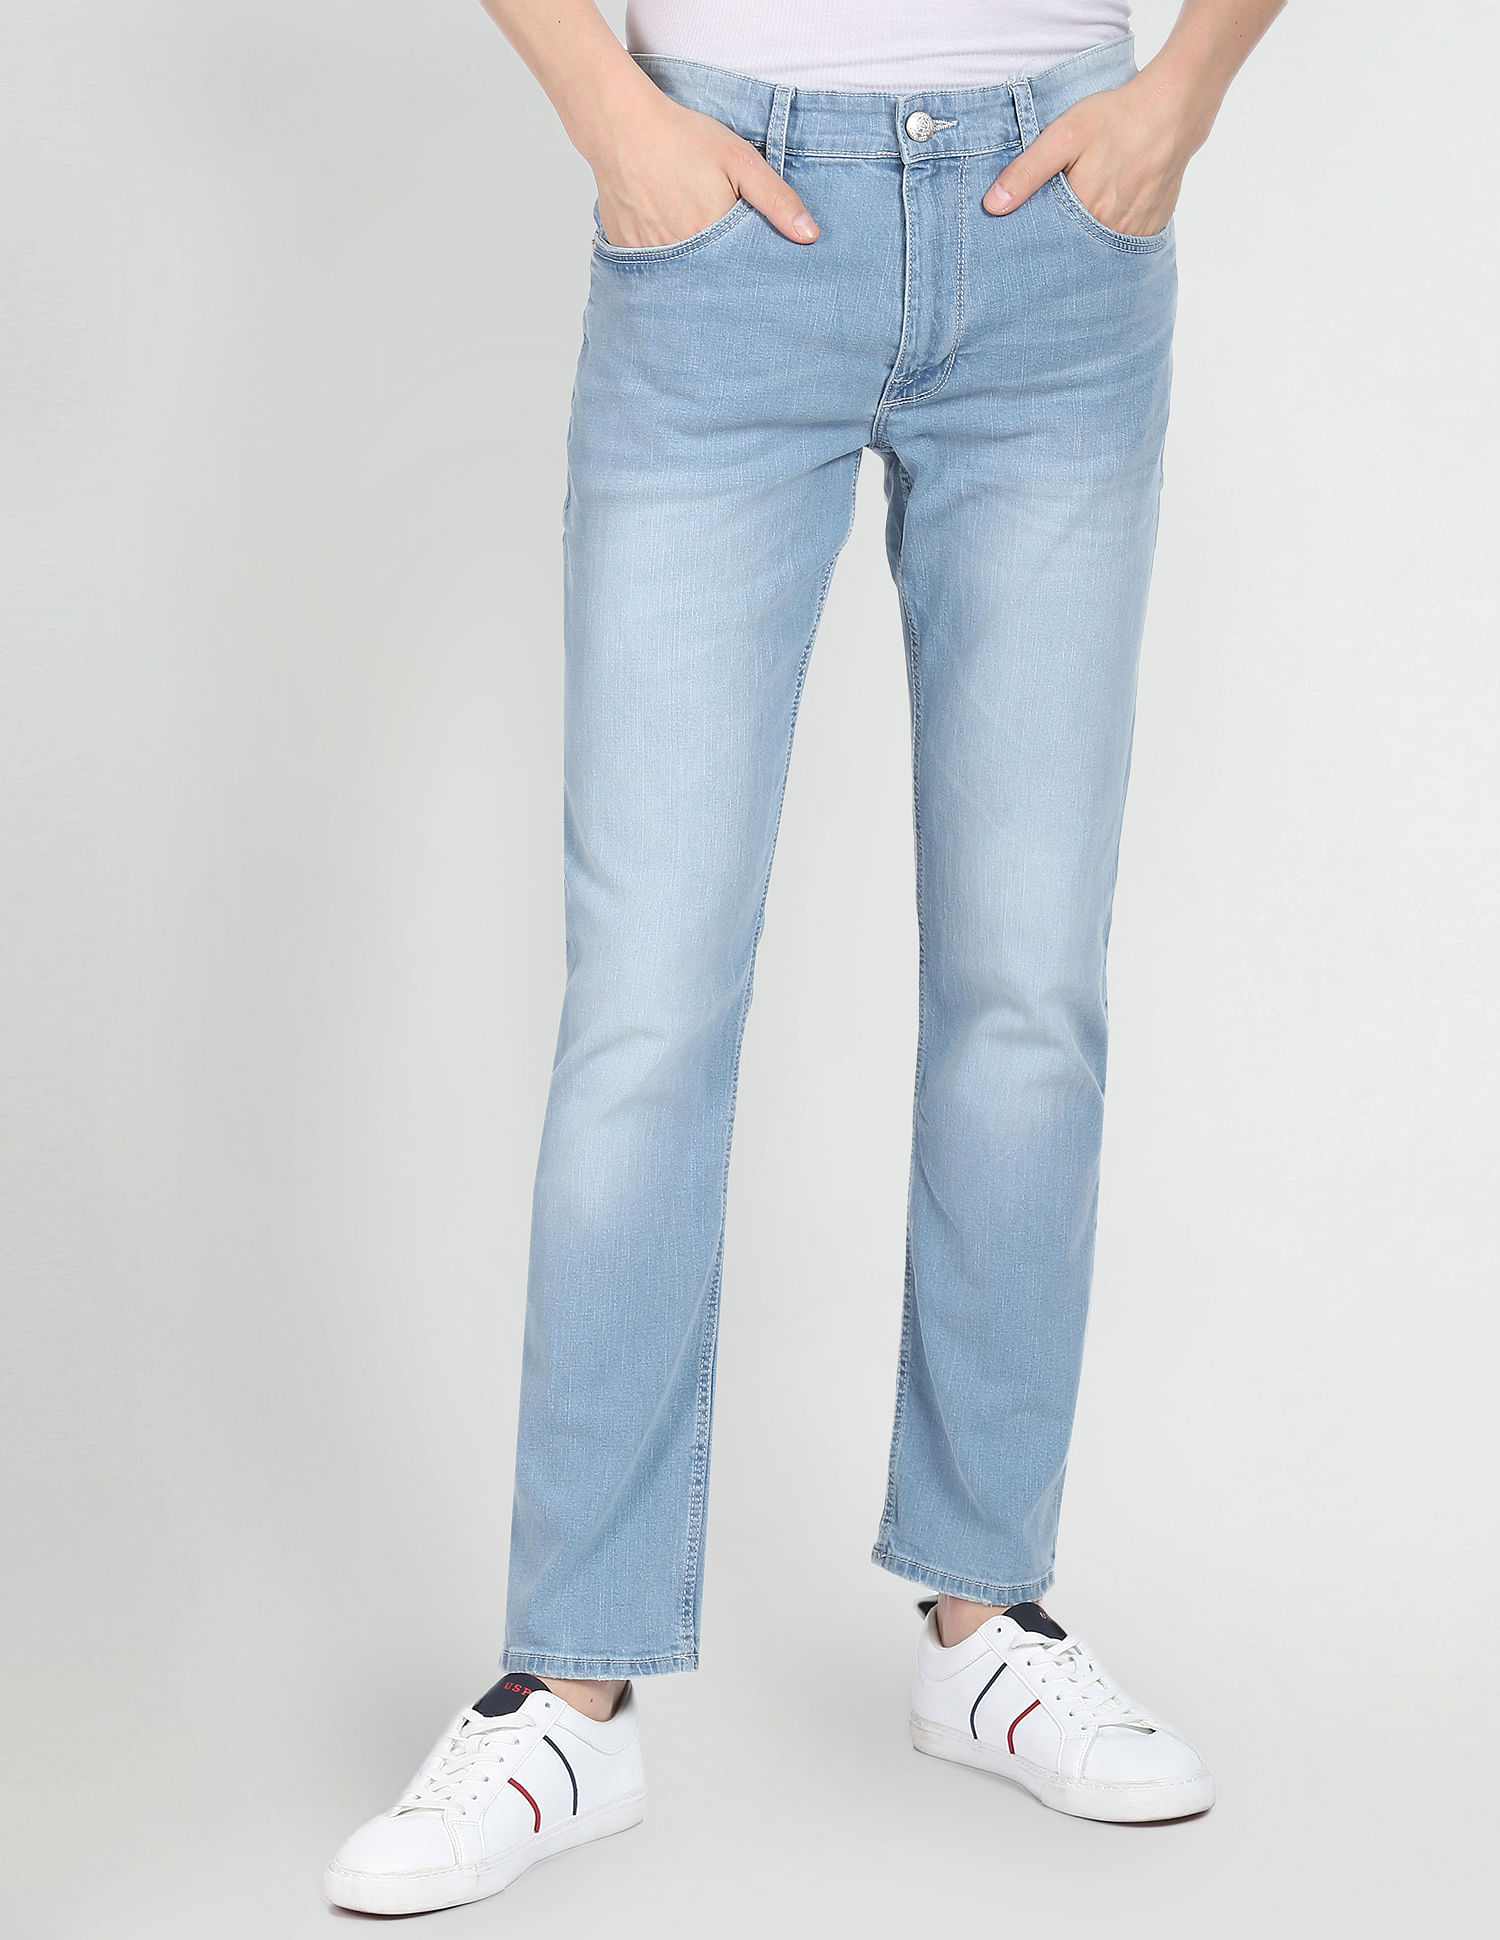 Buy AD by Arvind Skinny Fit Stone Wash Stretch Jeans - NNNOW.com